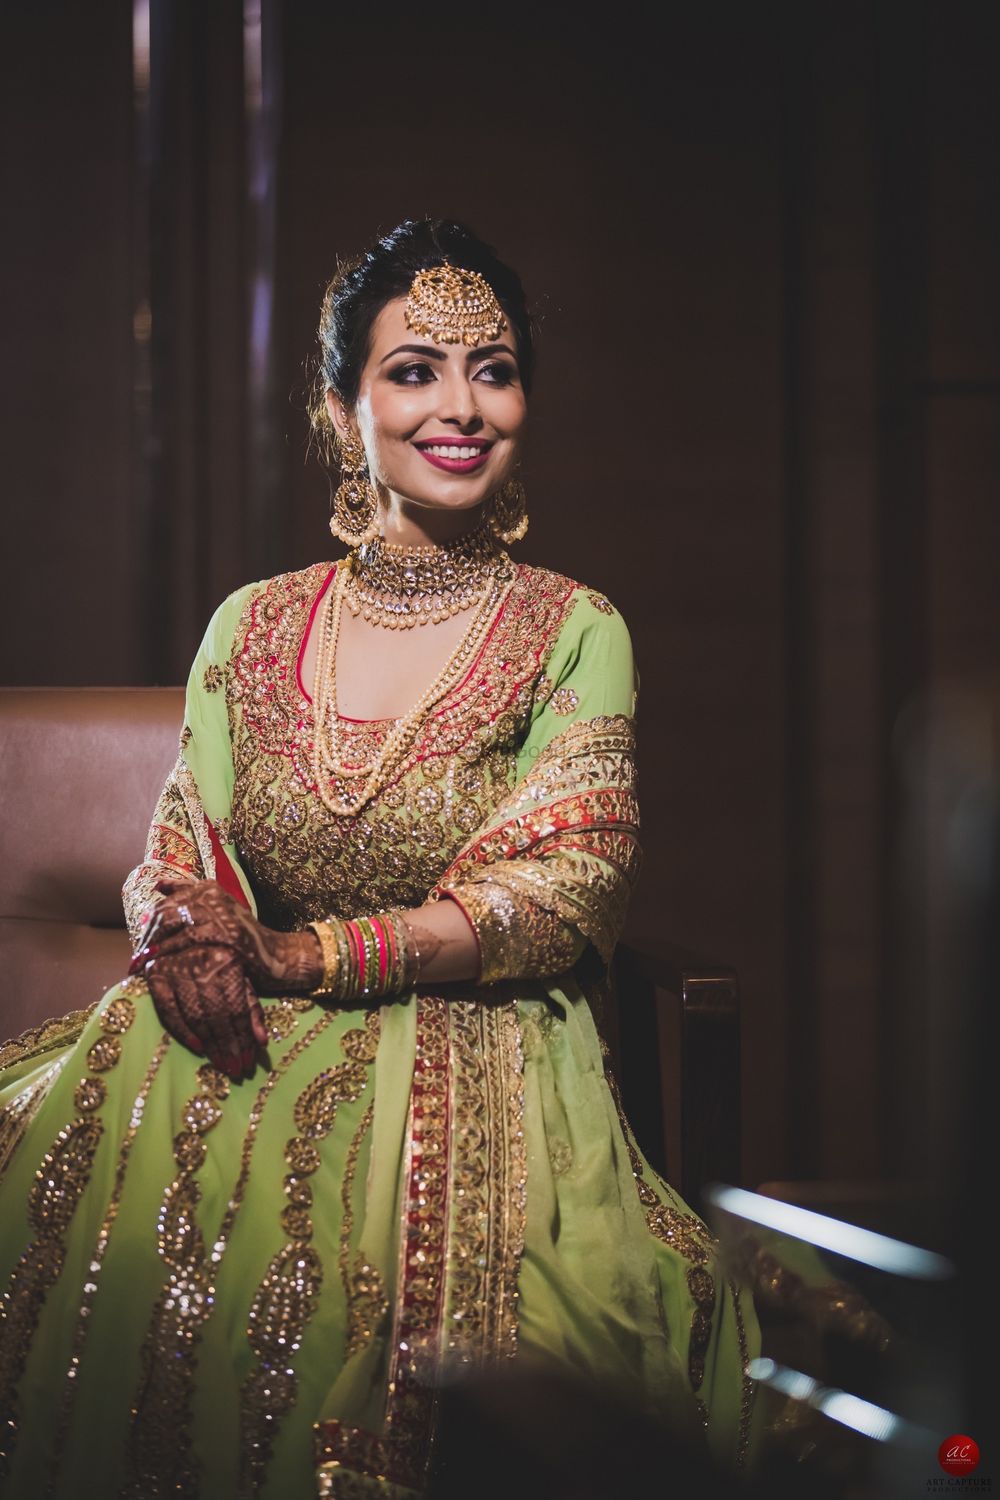 Photo of Gold engagement jewellery with layered necklaces and maangtikka